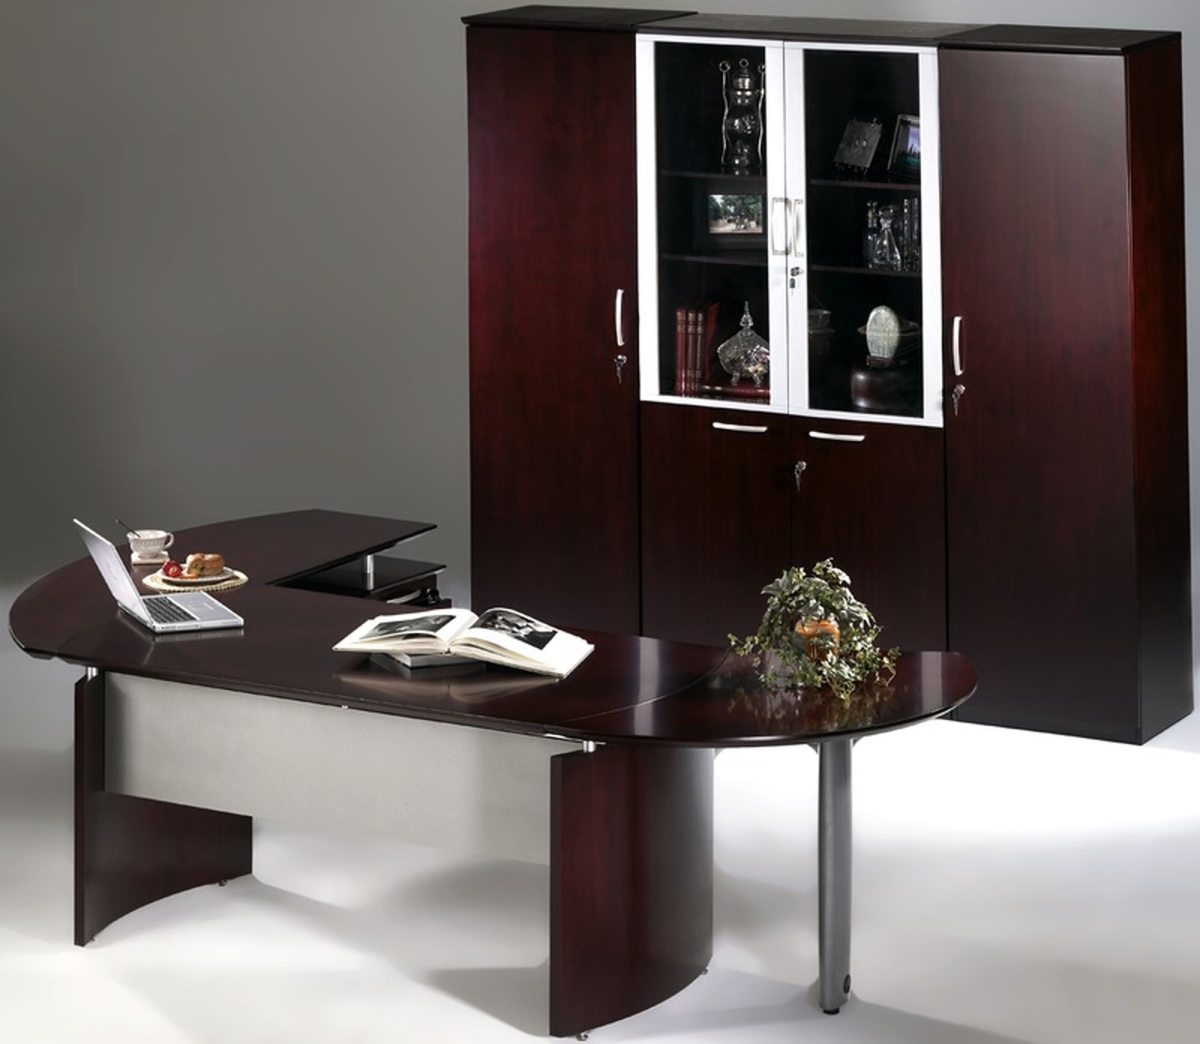 Nt11mah 116 X 103 In. Napoli Suite 11 Desk Suite With Right Return, Mahogany